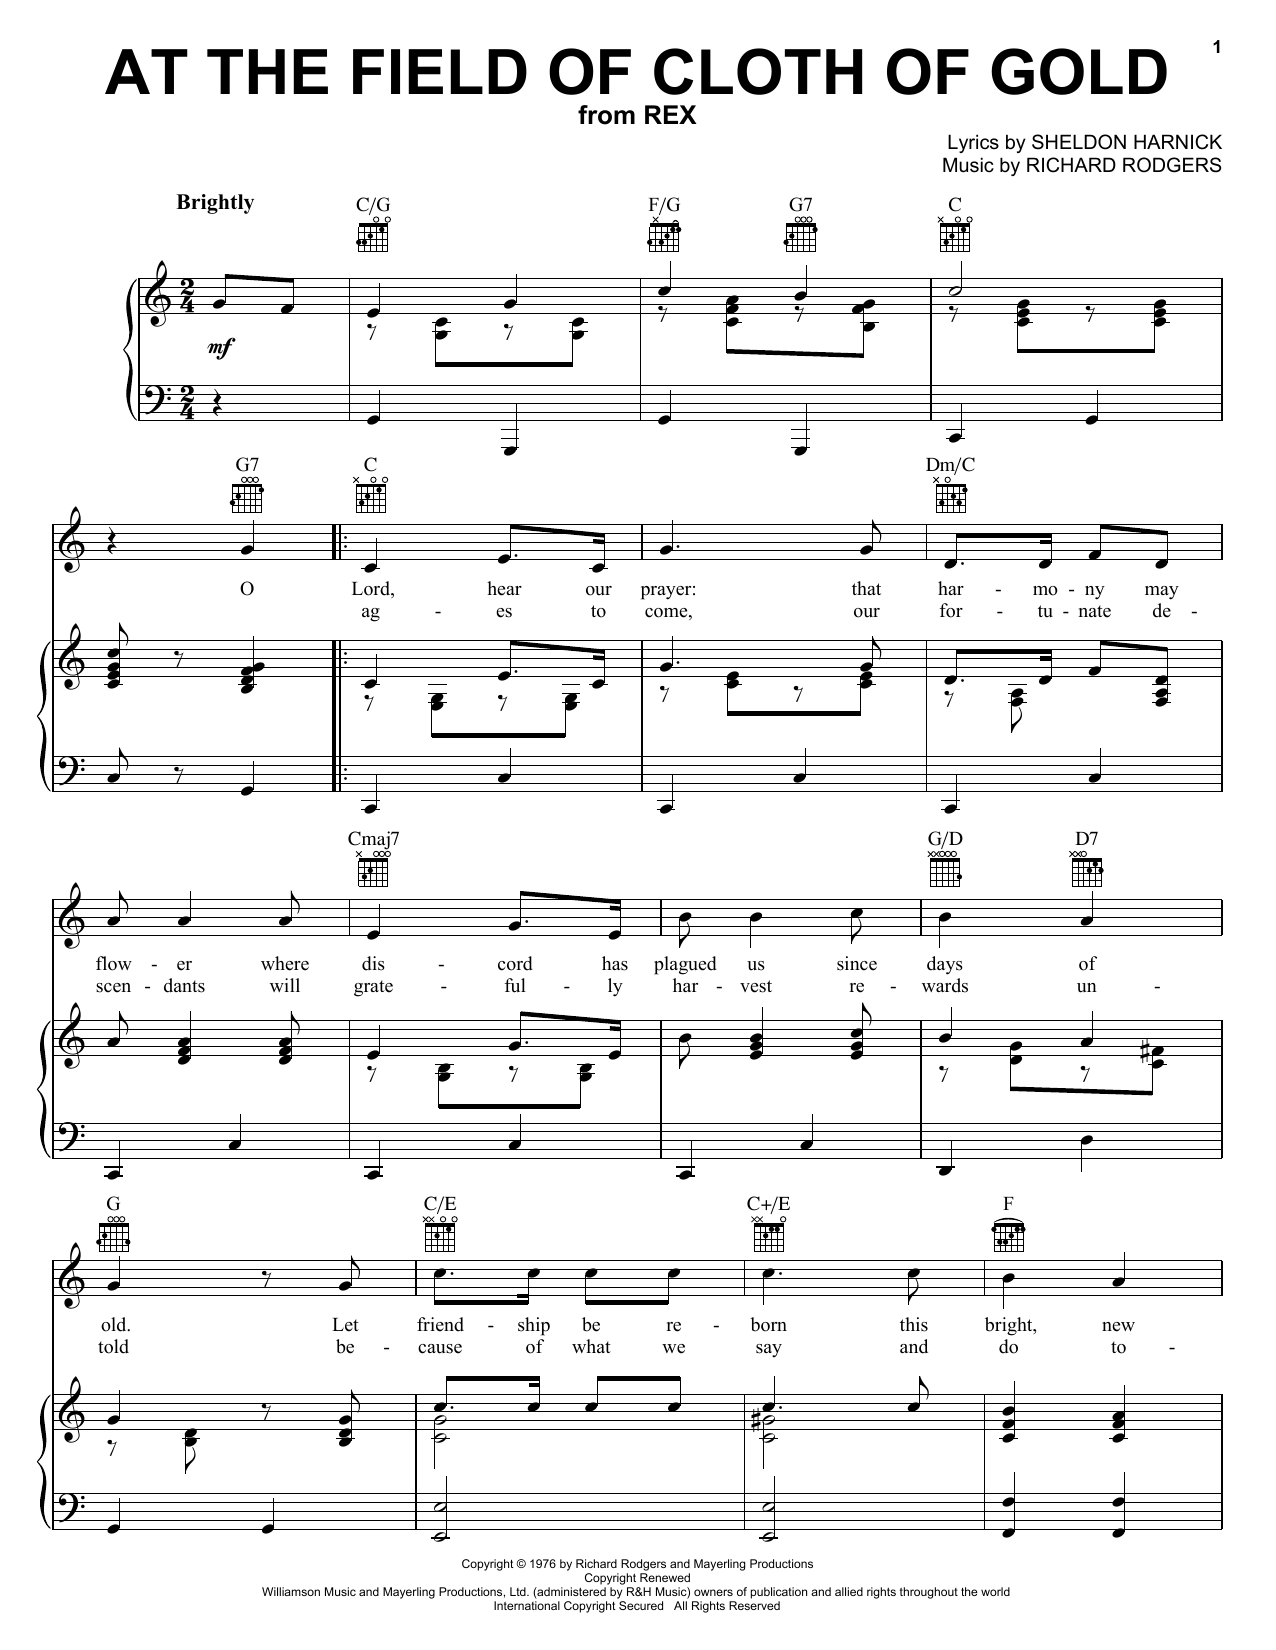 Richard Rodgers At The Field Of Cloth Of Gold sheet music notes printable PDF score